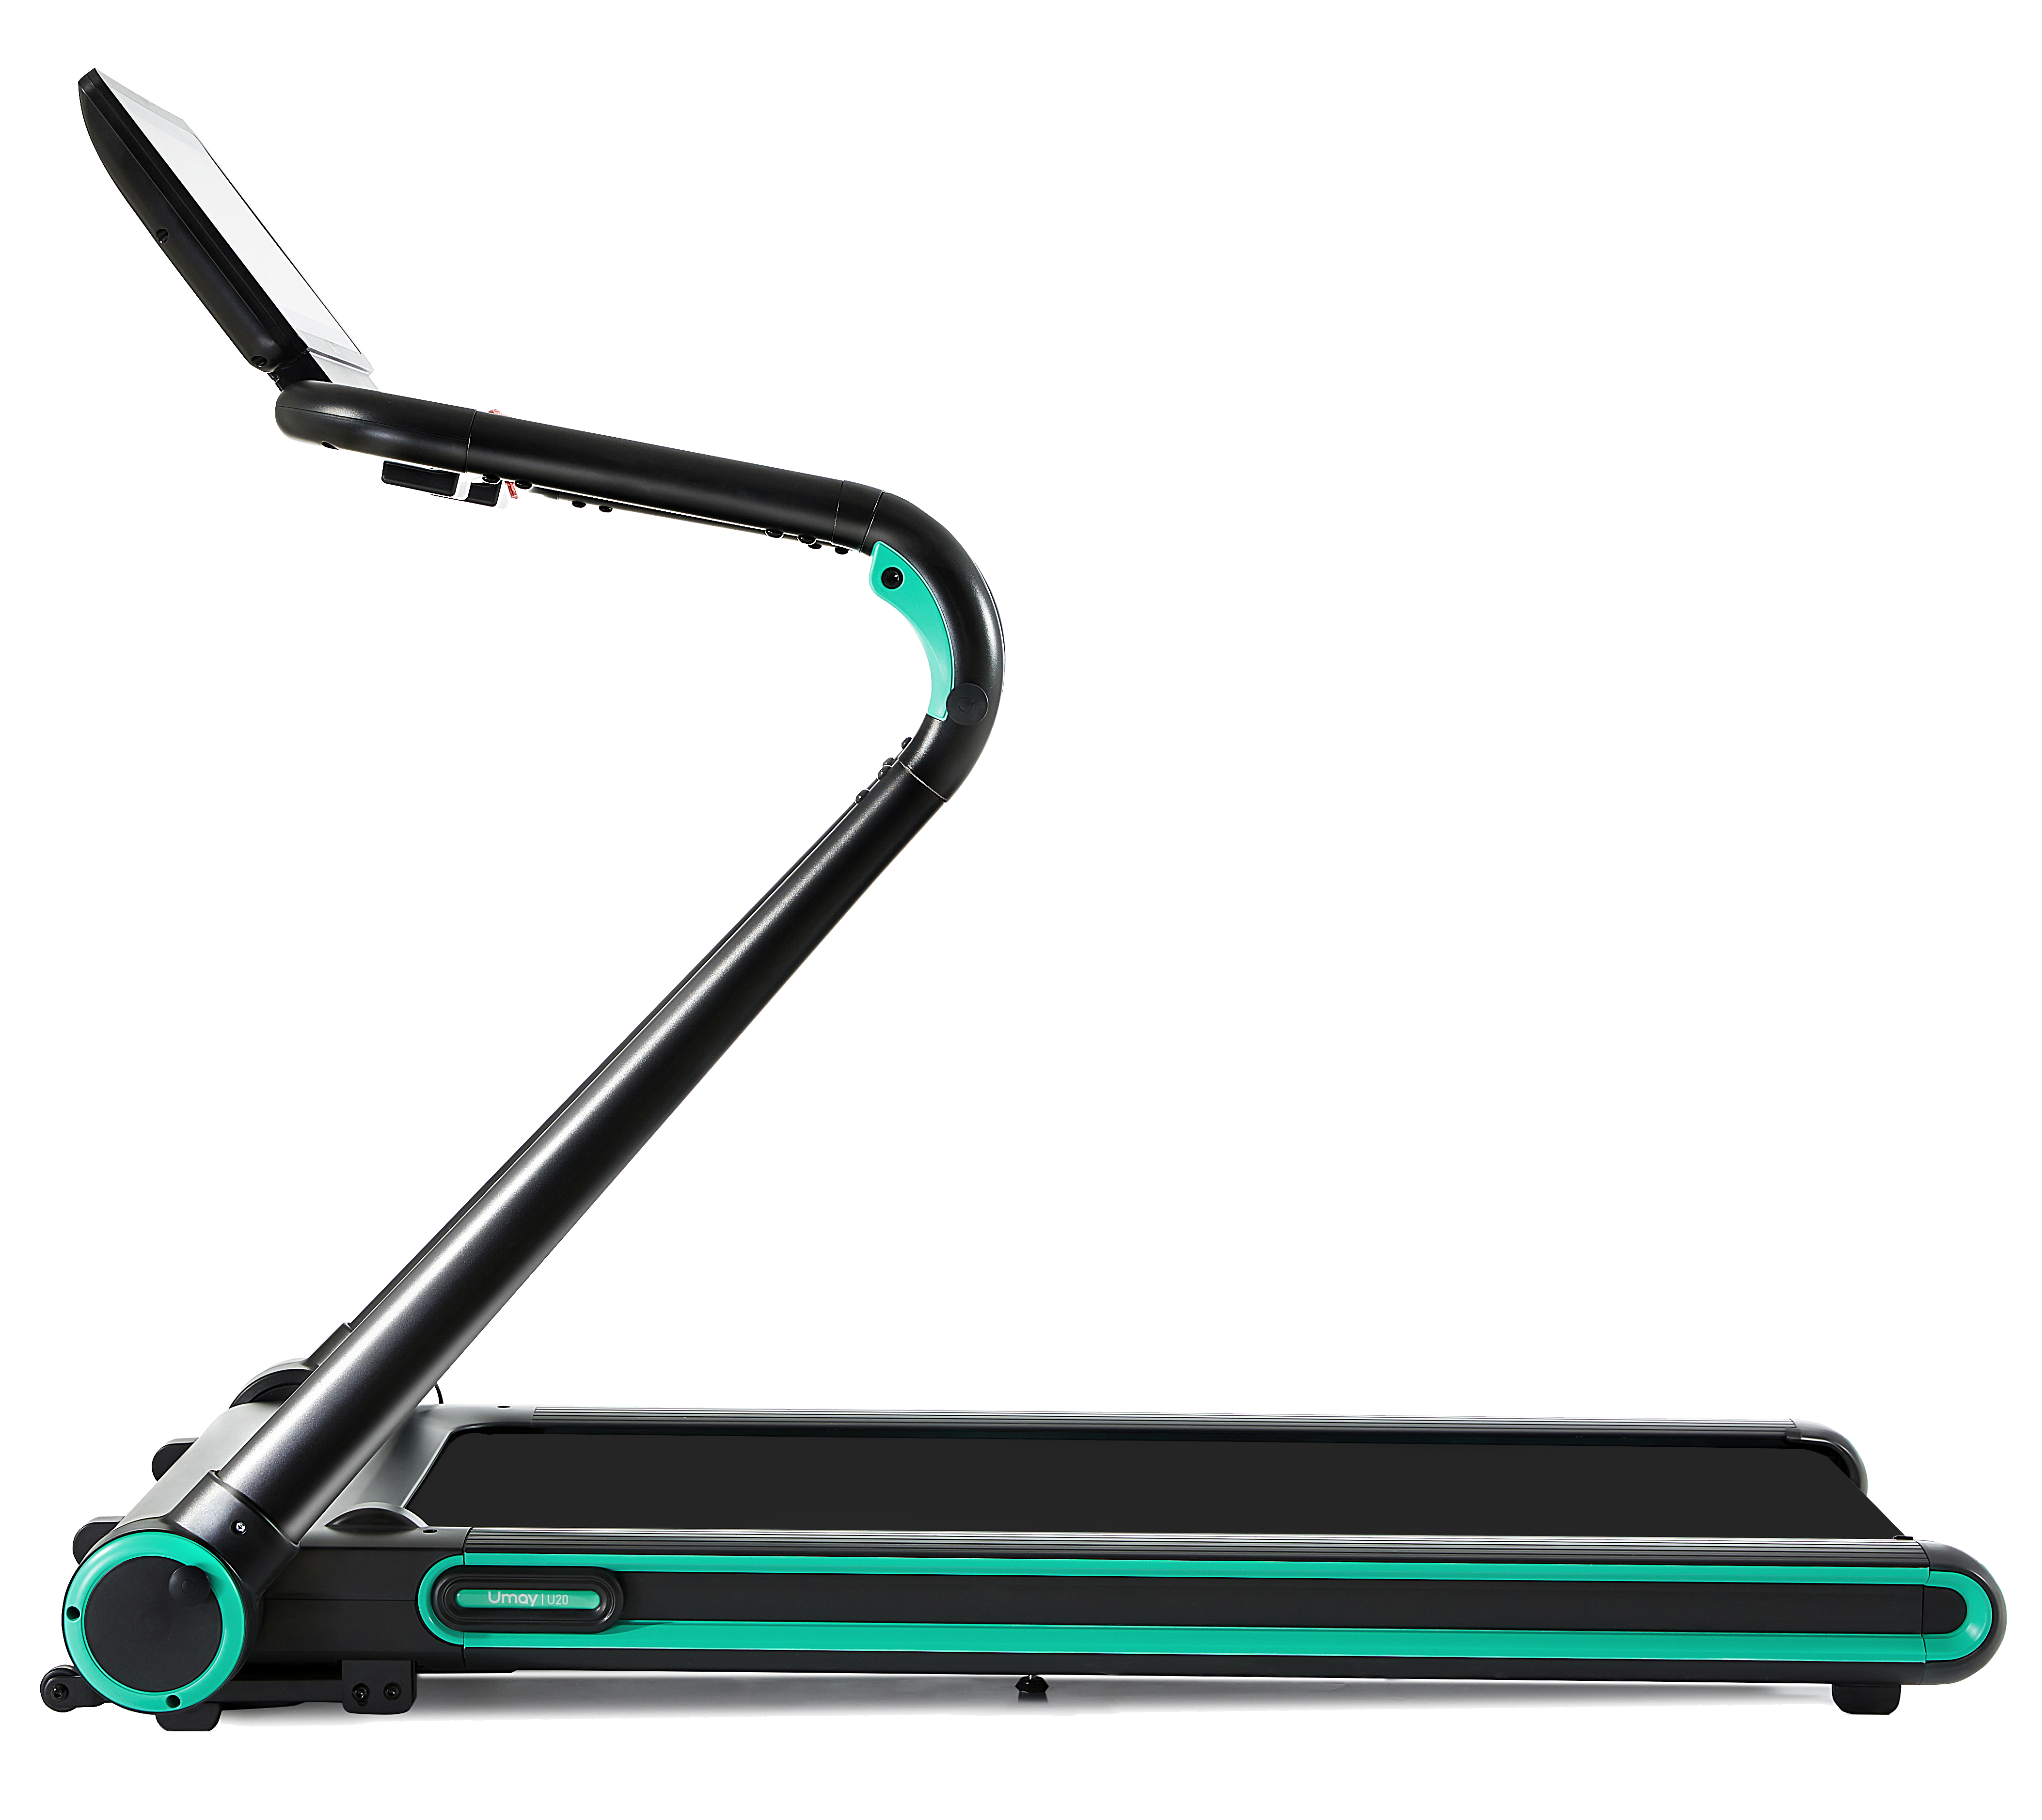 Treadmill Smart Mirror Fitness Training Maching For Home